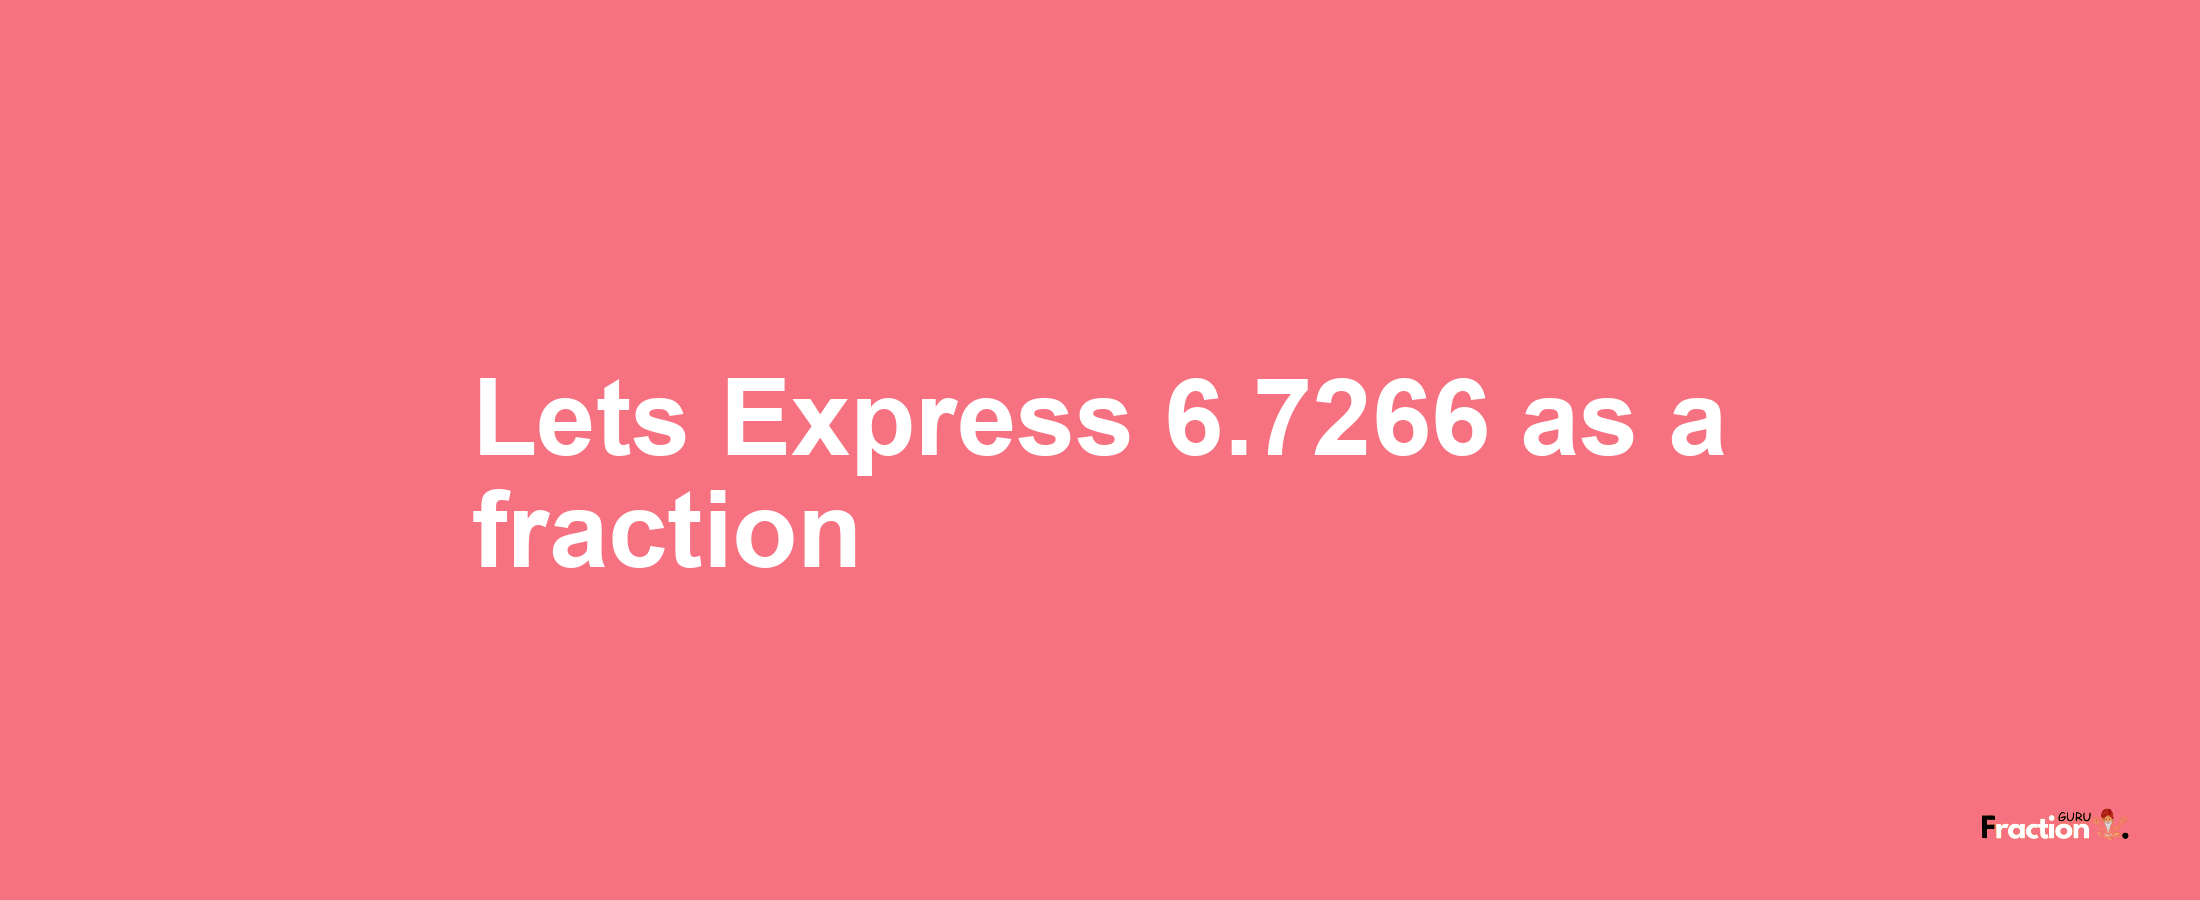 Lets Express 6.7266 as afraction